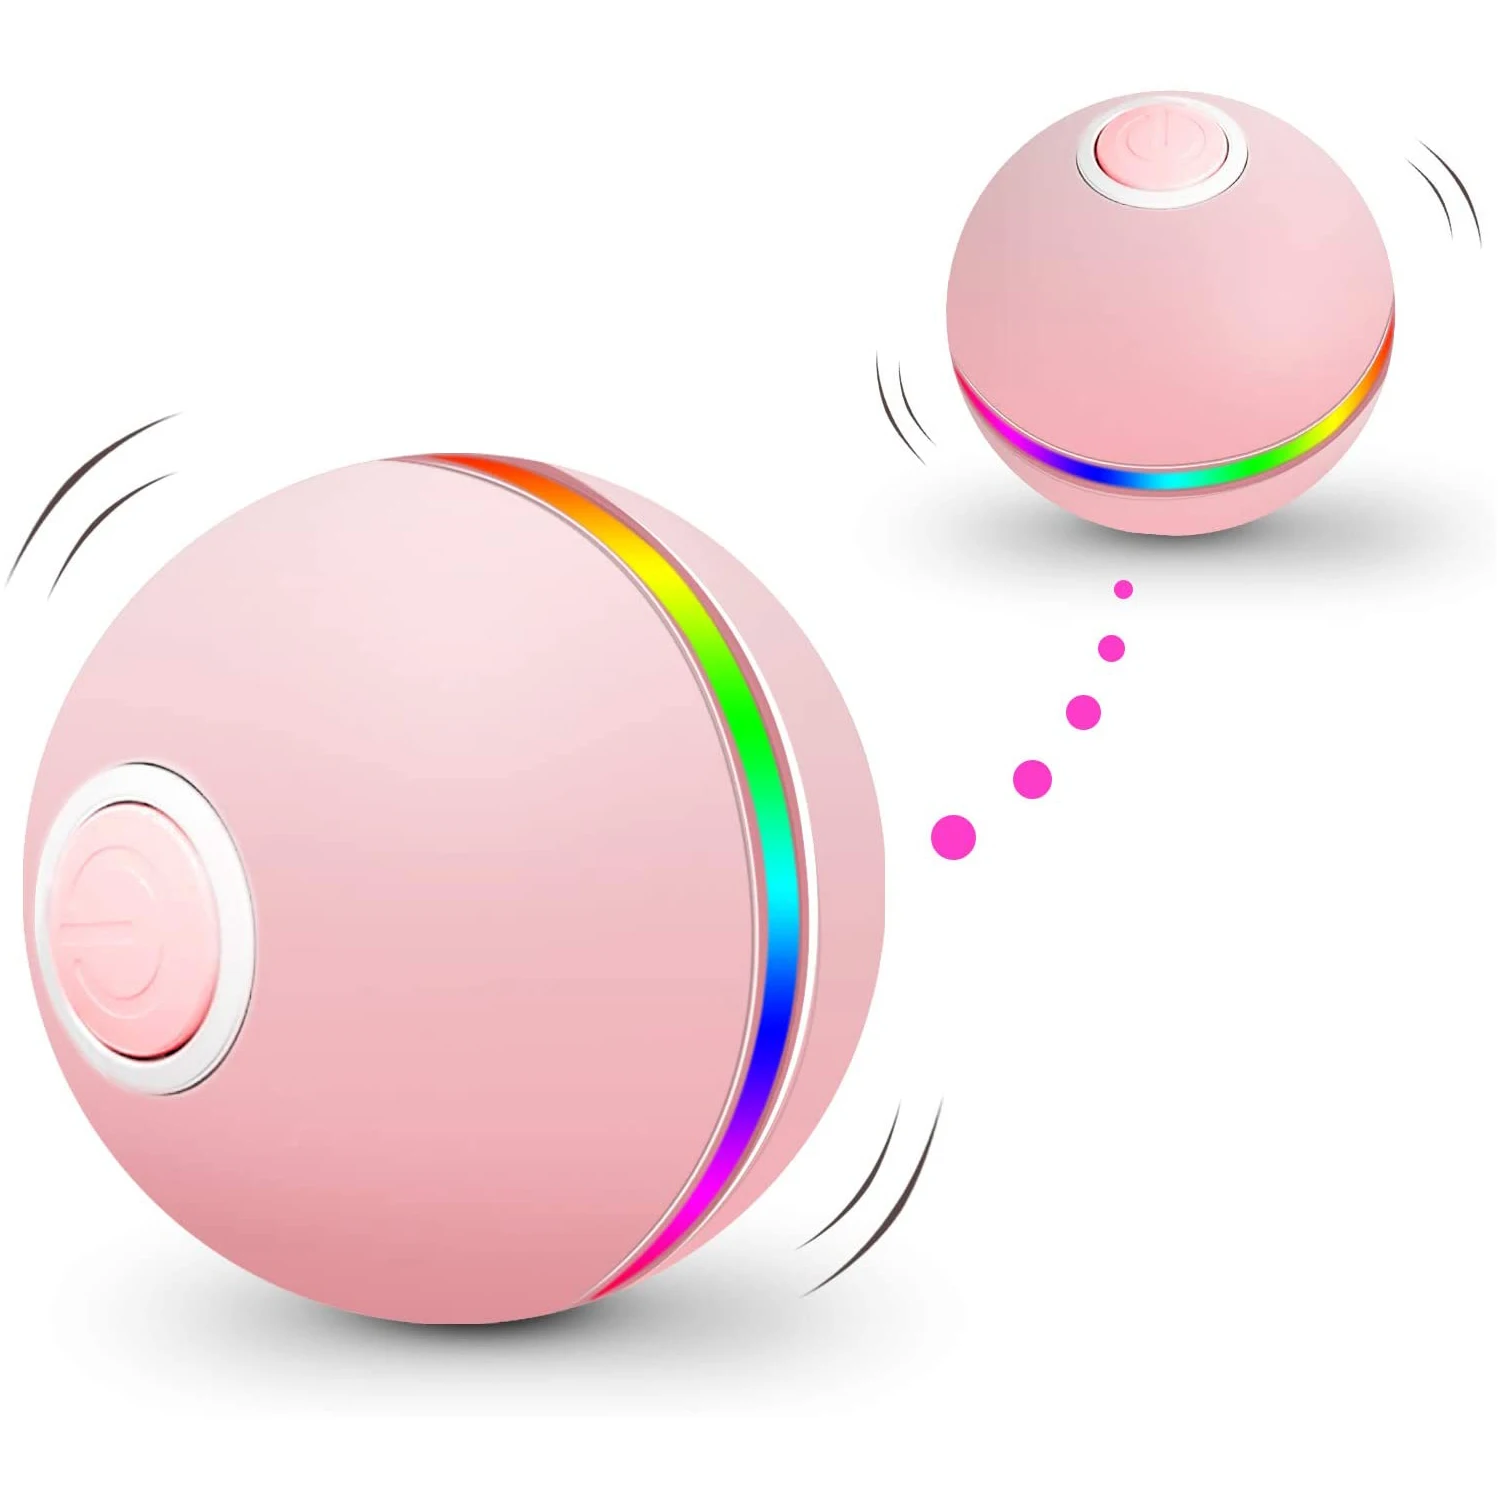 

Newest Arrival 3 Light Modes USB Automatic Cat Laser Toy Interactive Rolling Cat Ball, Pink/white/blue/grey